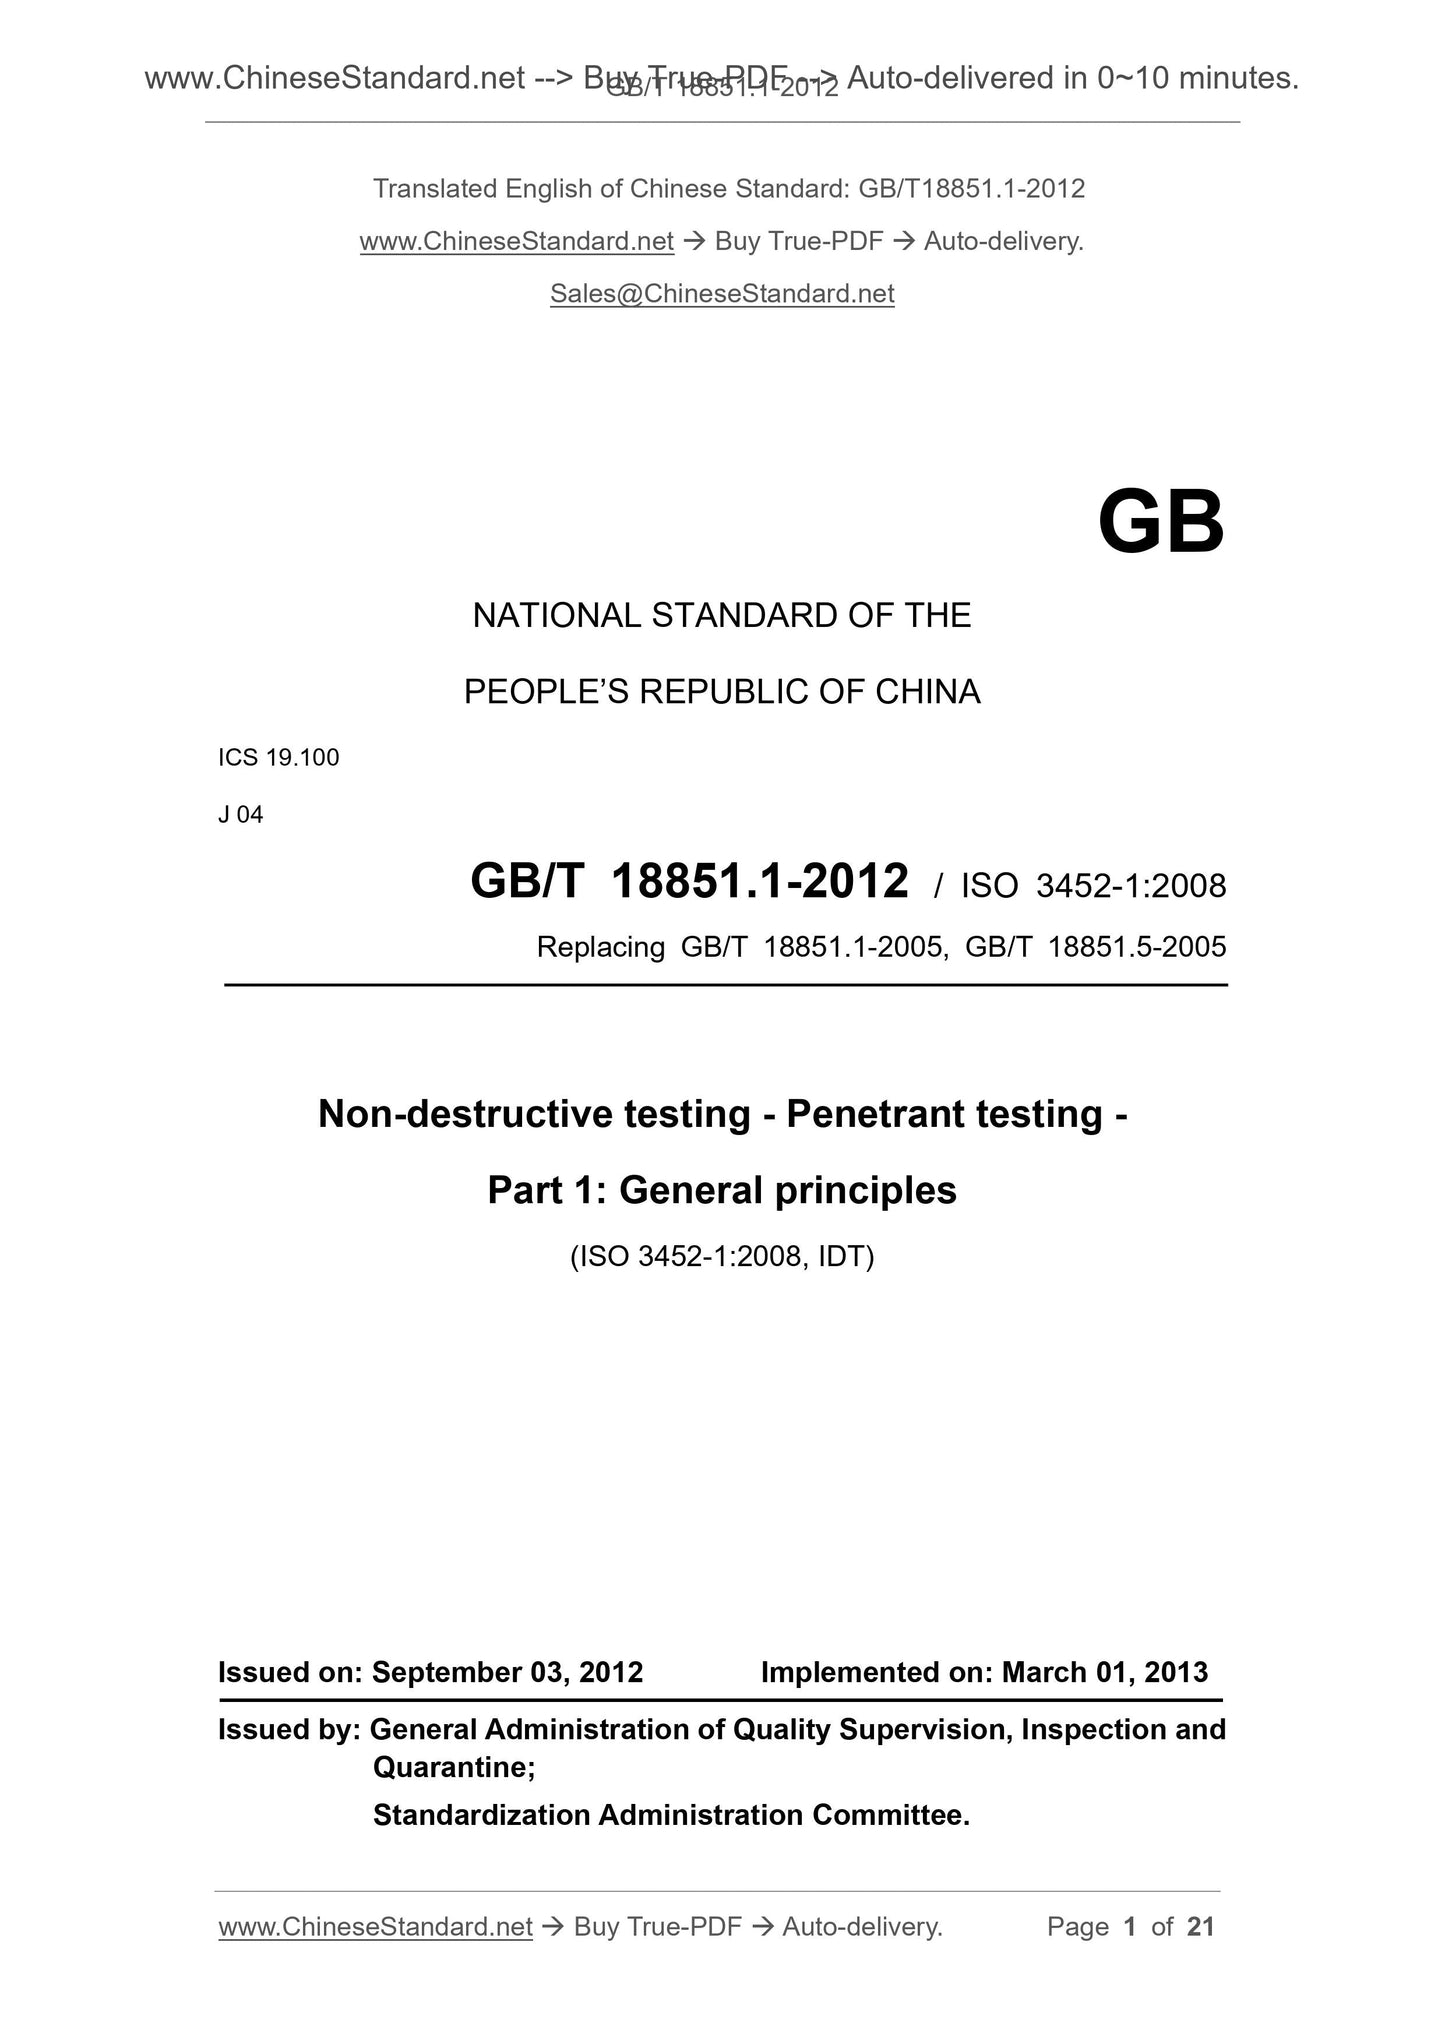 GB/T 18851.1-2012 Page 1